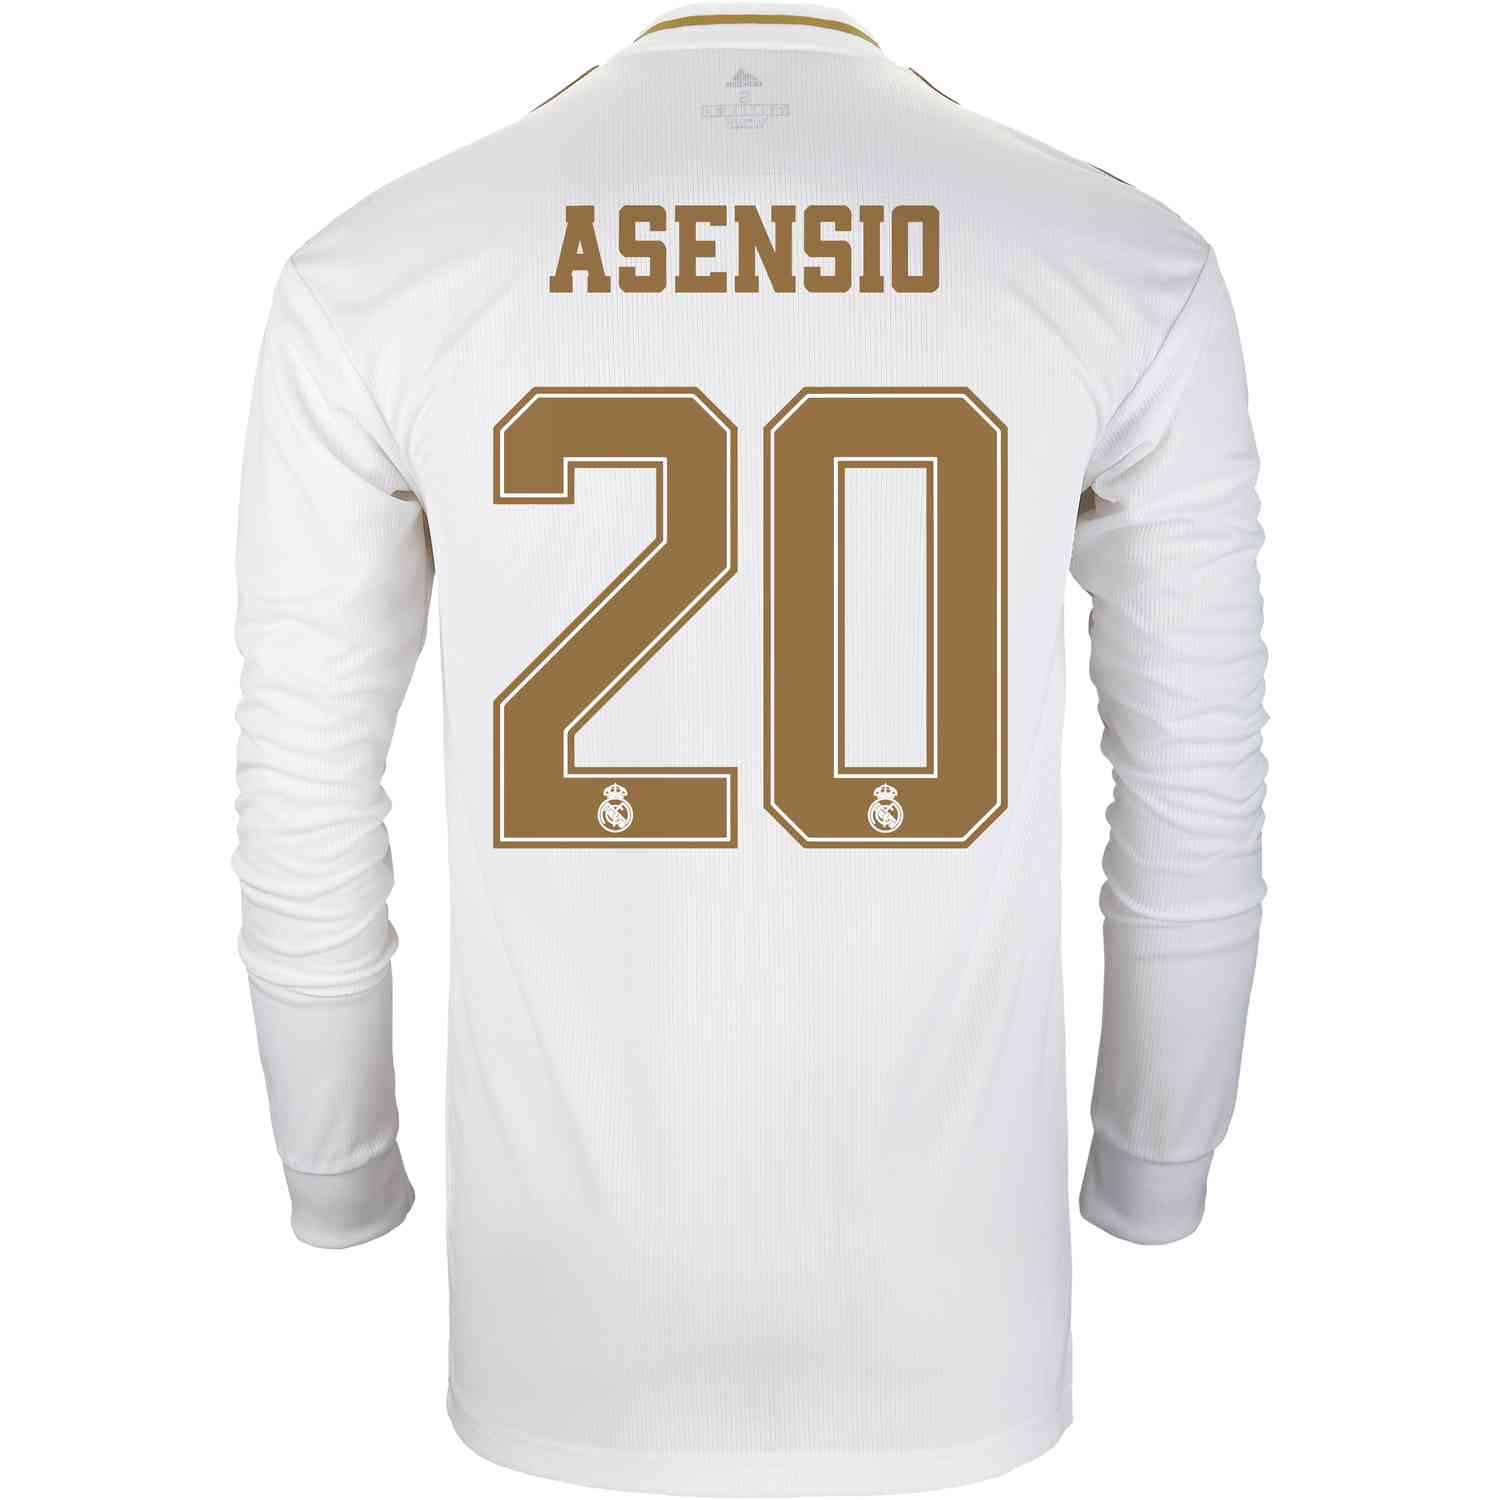 2019/20 adidas Marco Asensio Real Madrid Home L/S Jersey - SoccerPro